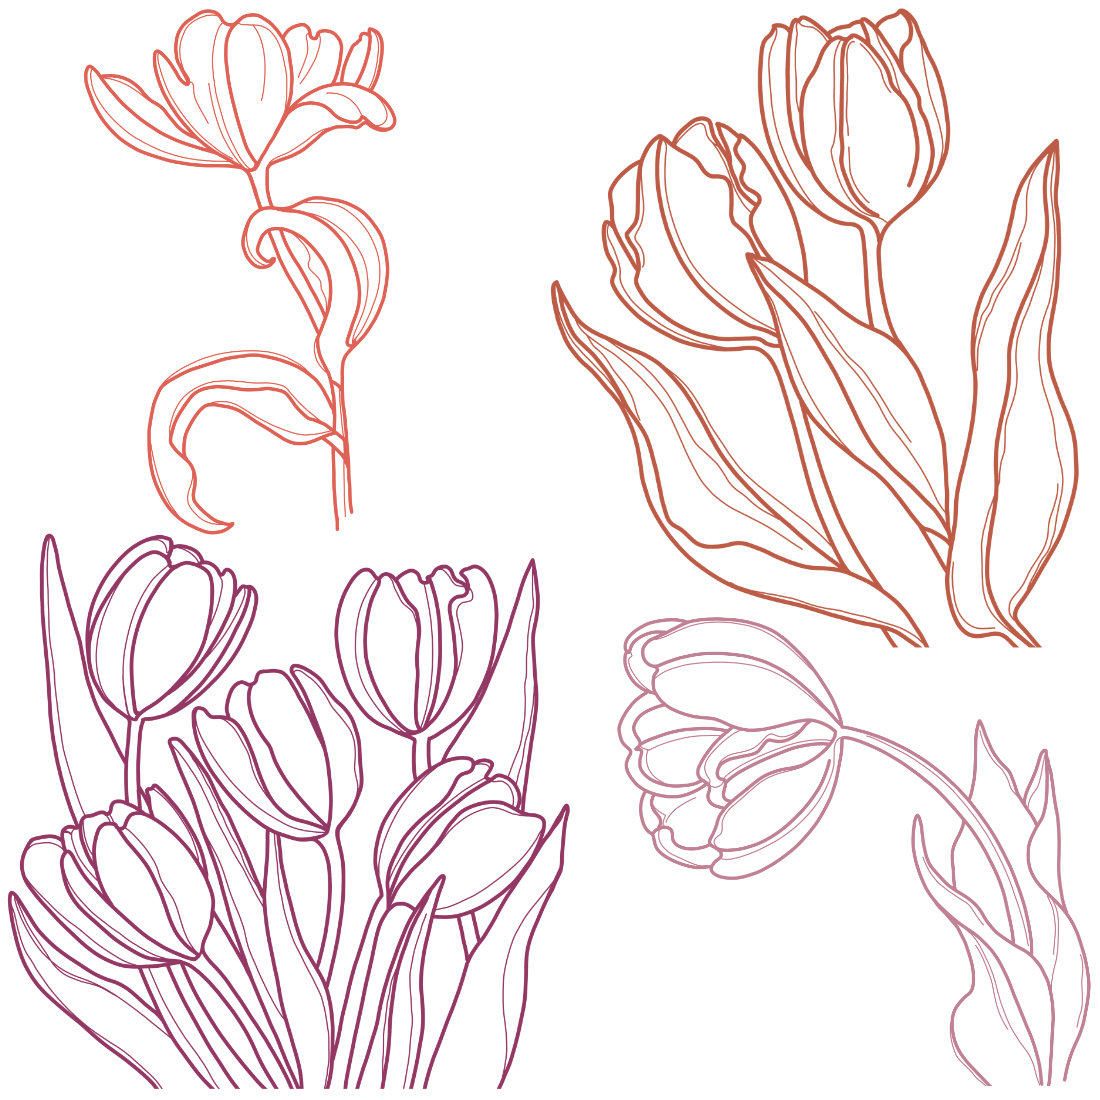 Line drawing of tulips on a white background.